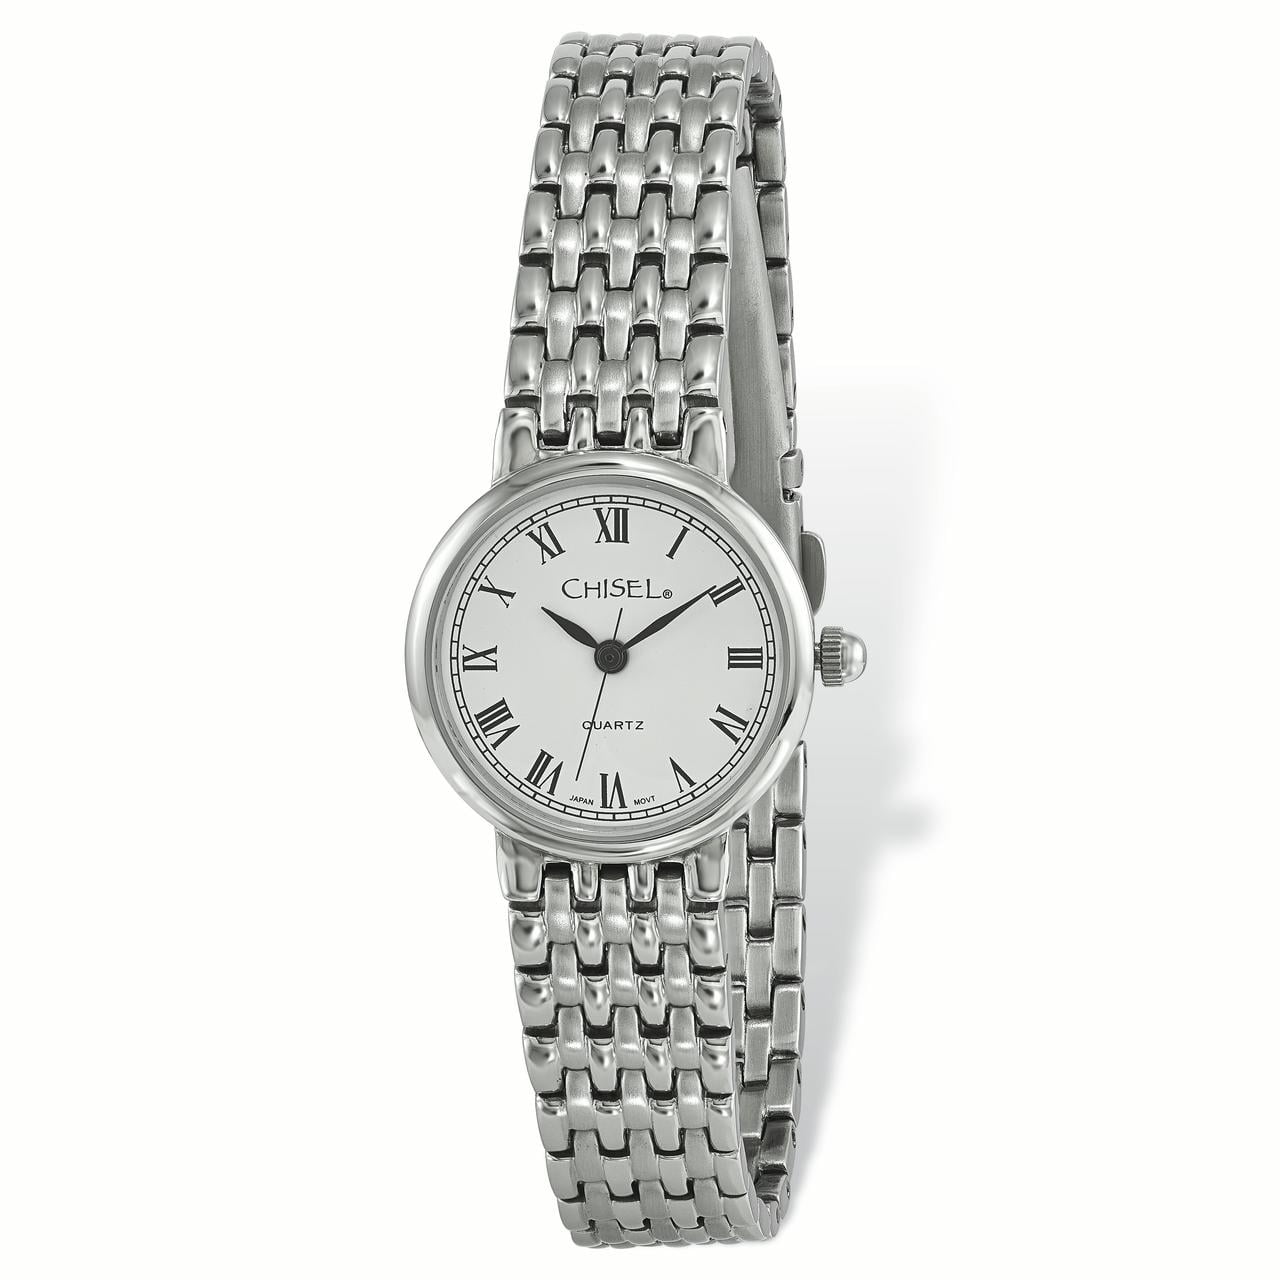 Ladies Chisel Stainless Steel White Dial Watch - Walmart.com